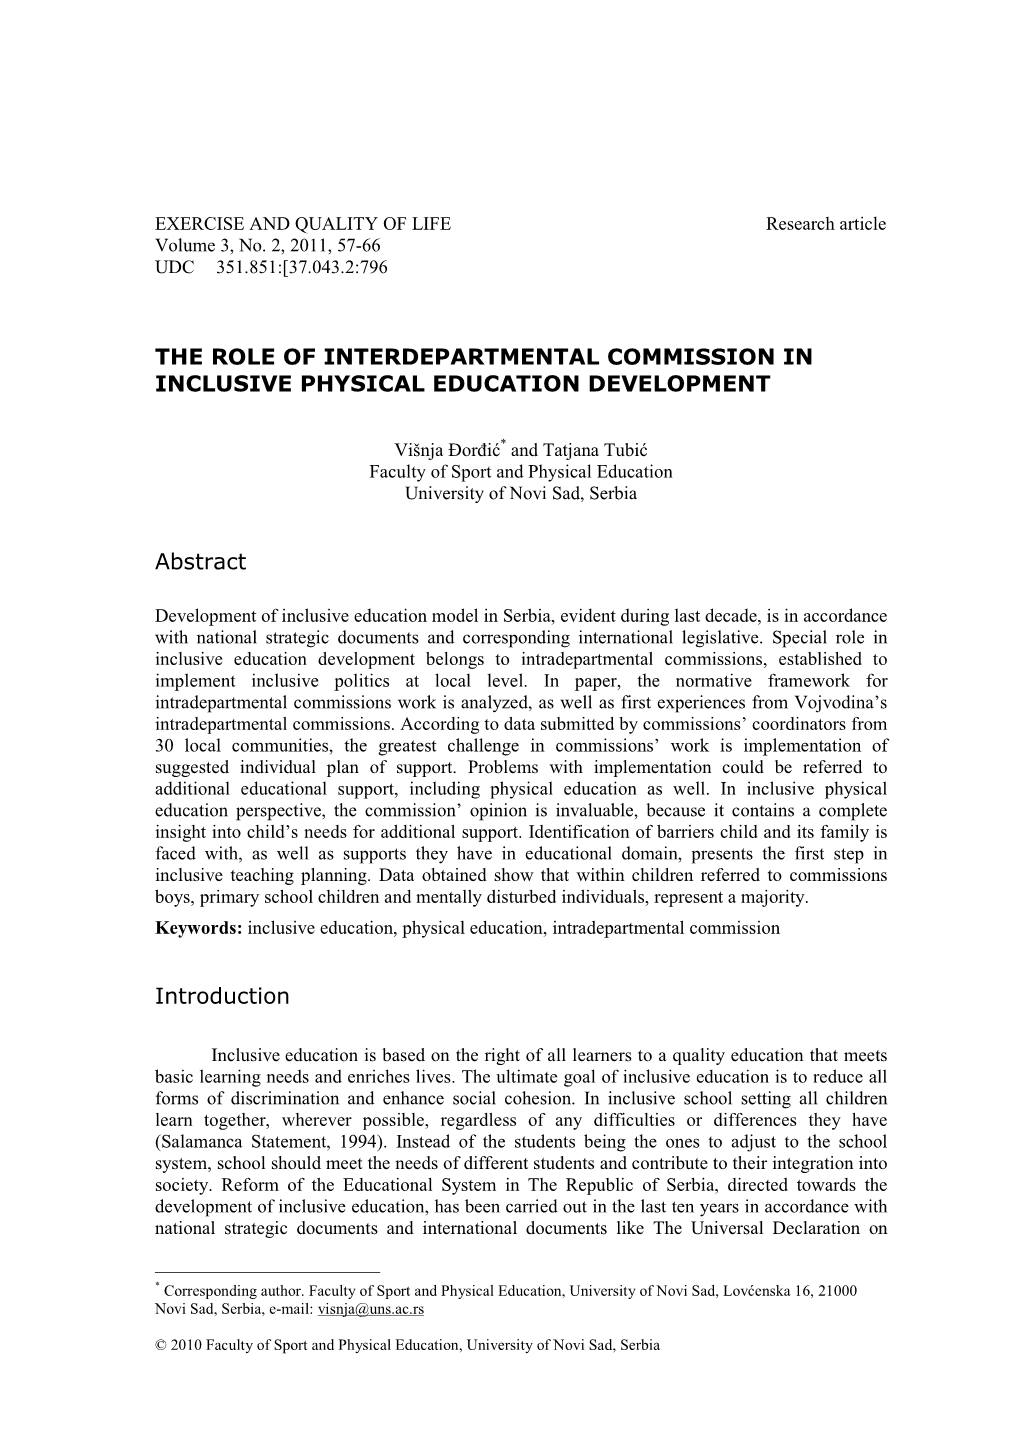 The Role of Interdepartmental Commission in Inclusive Physical Education Development